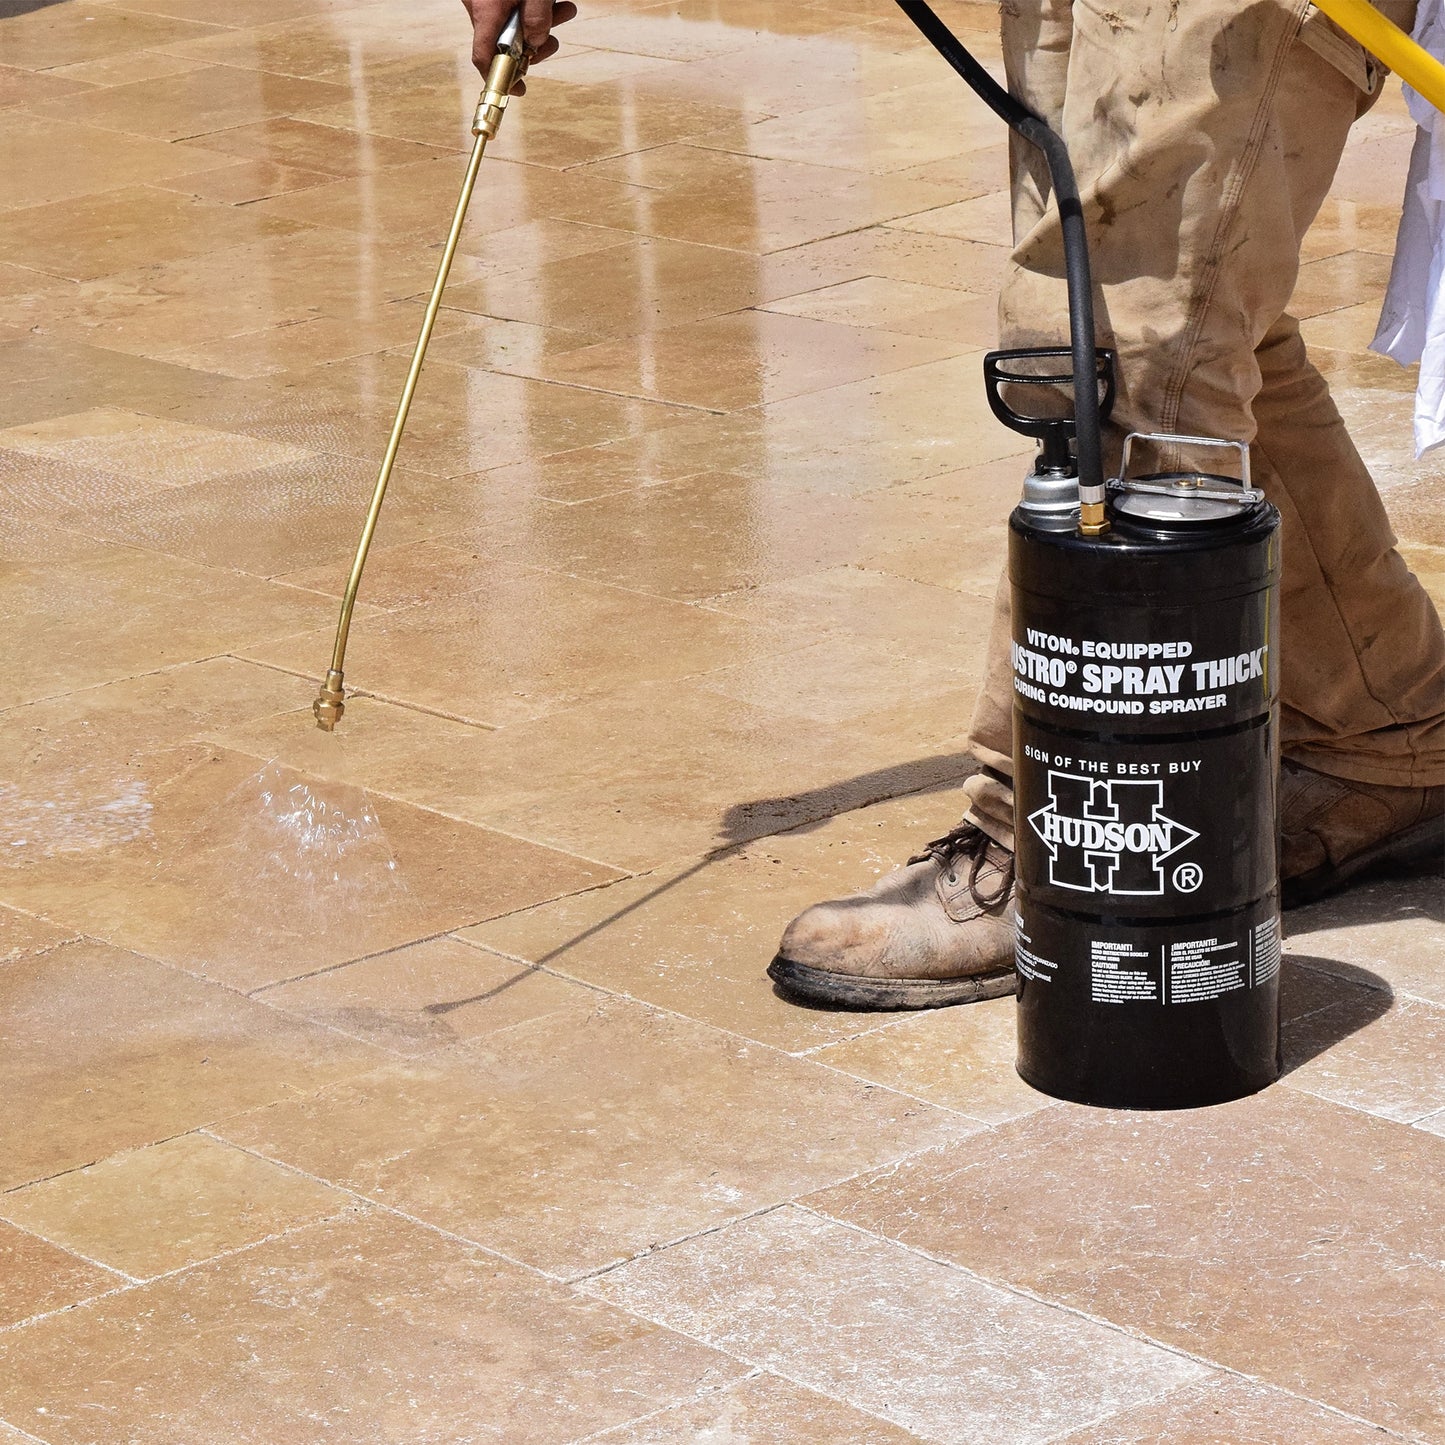 SRW Products S-PSX Stone Penetrating X-treme - Specialty Seal™ application